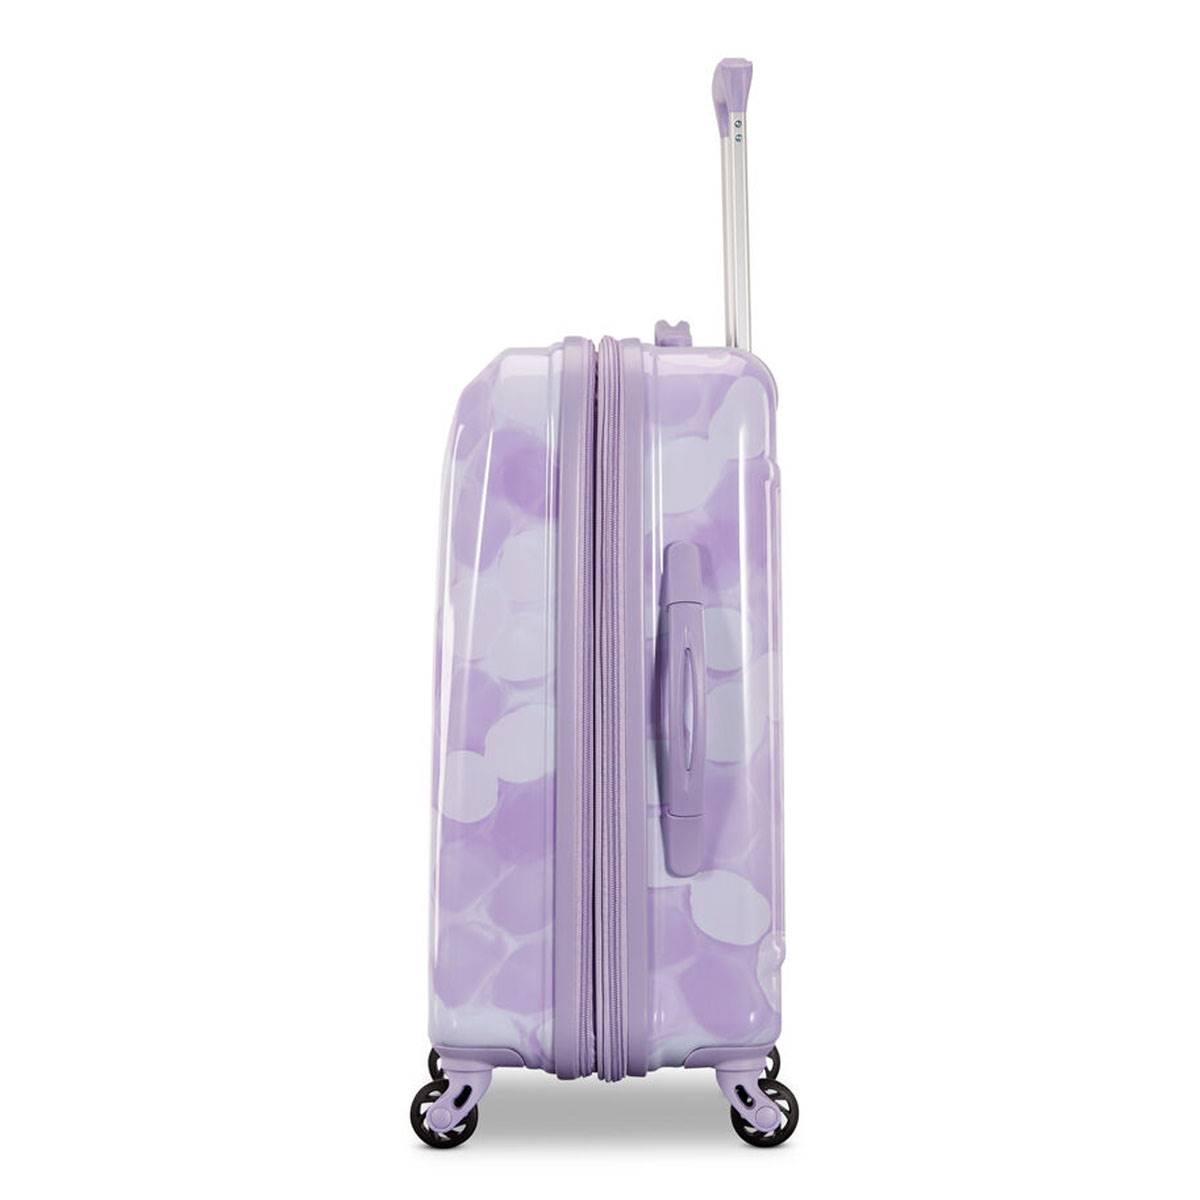 American Tourister Moonlight 21in. Carry-On Luggage